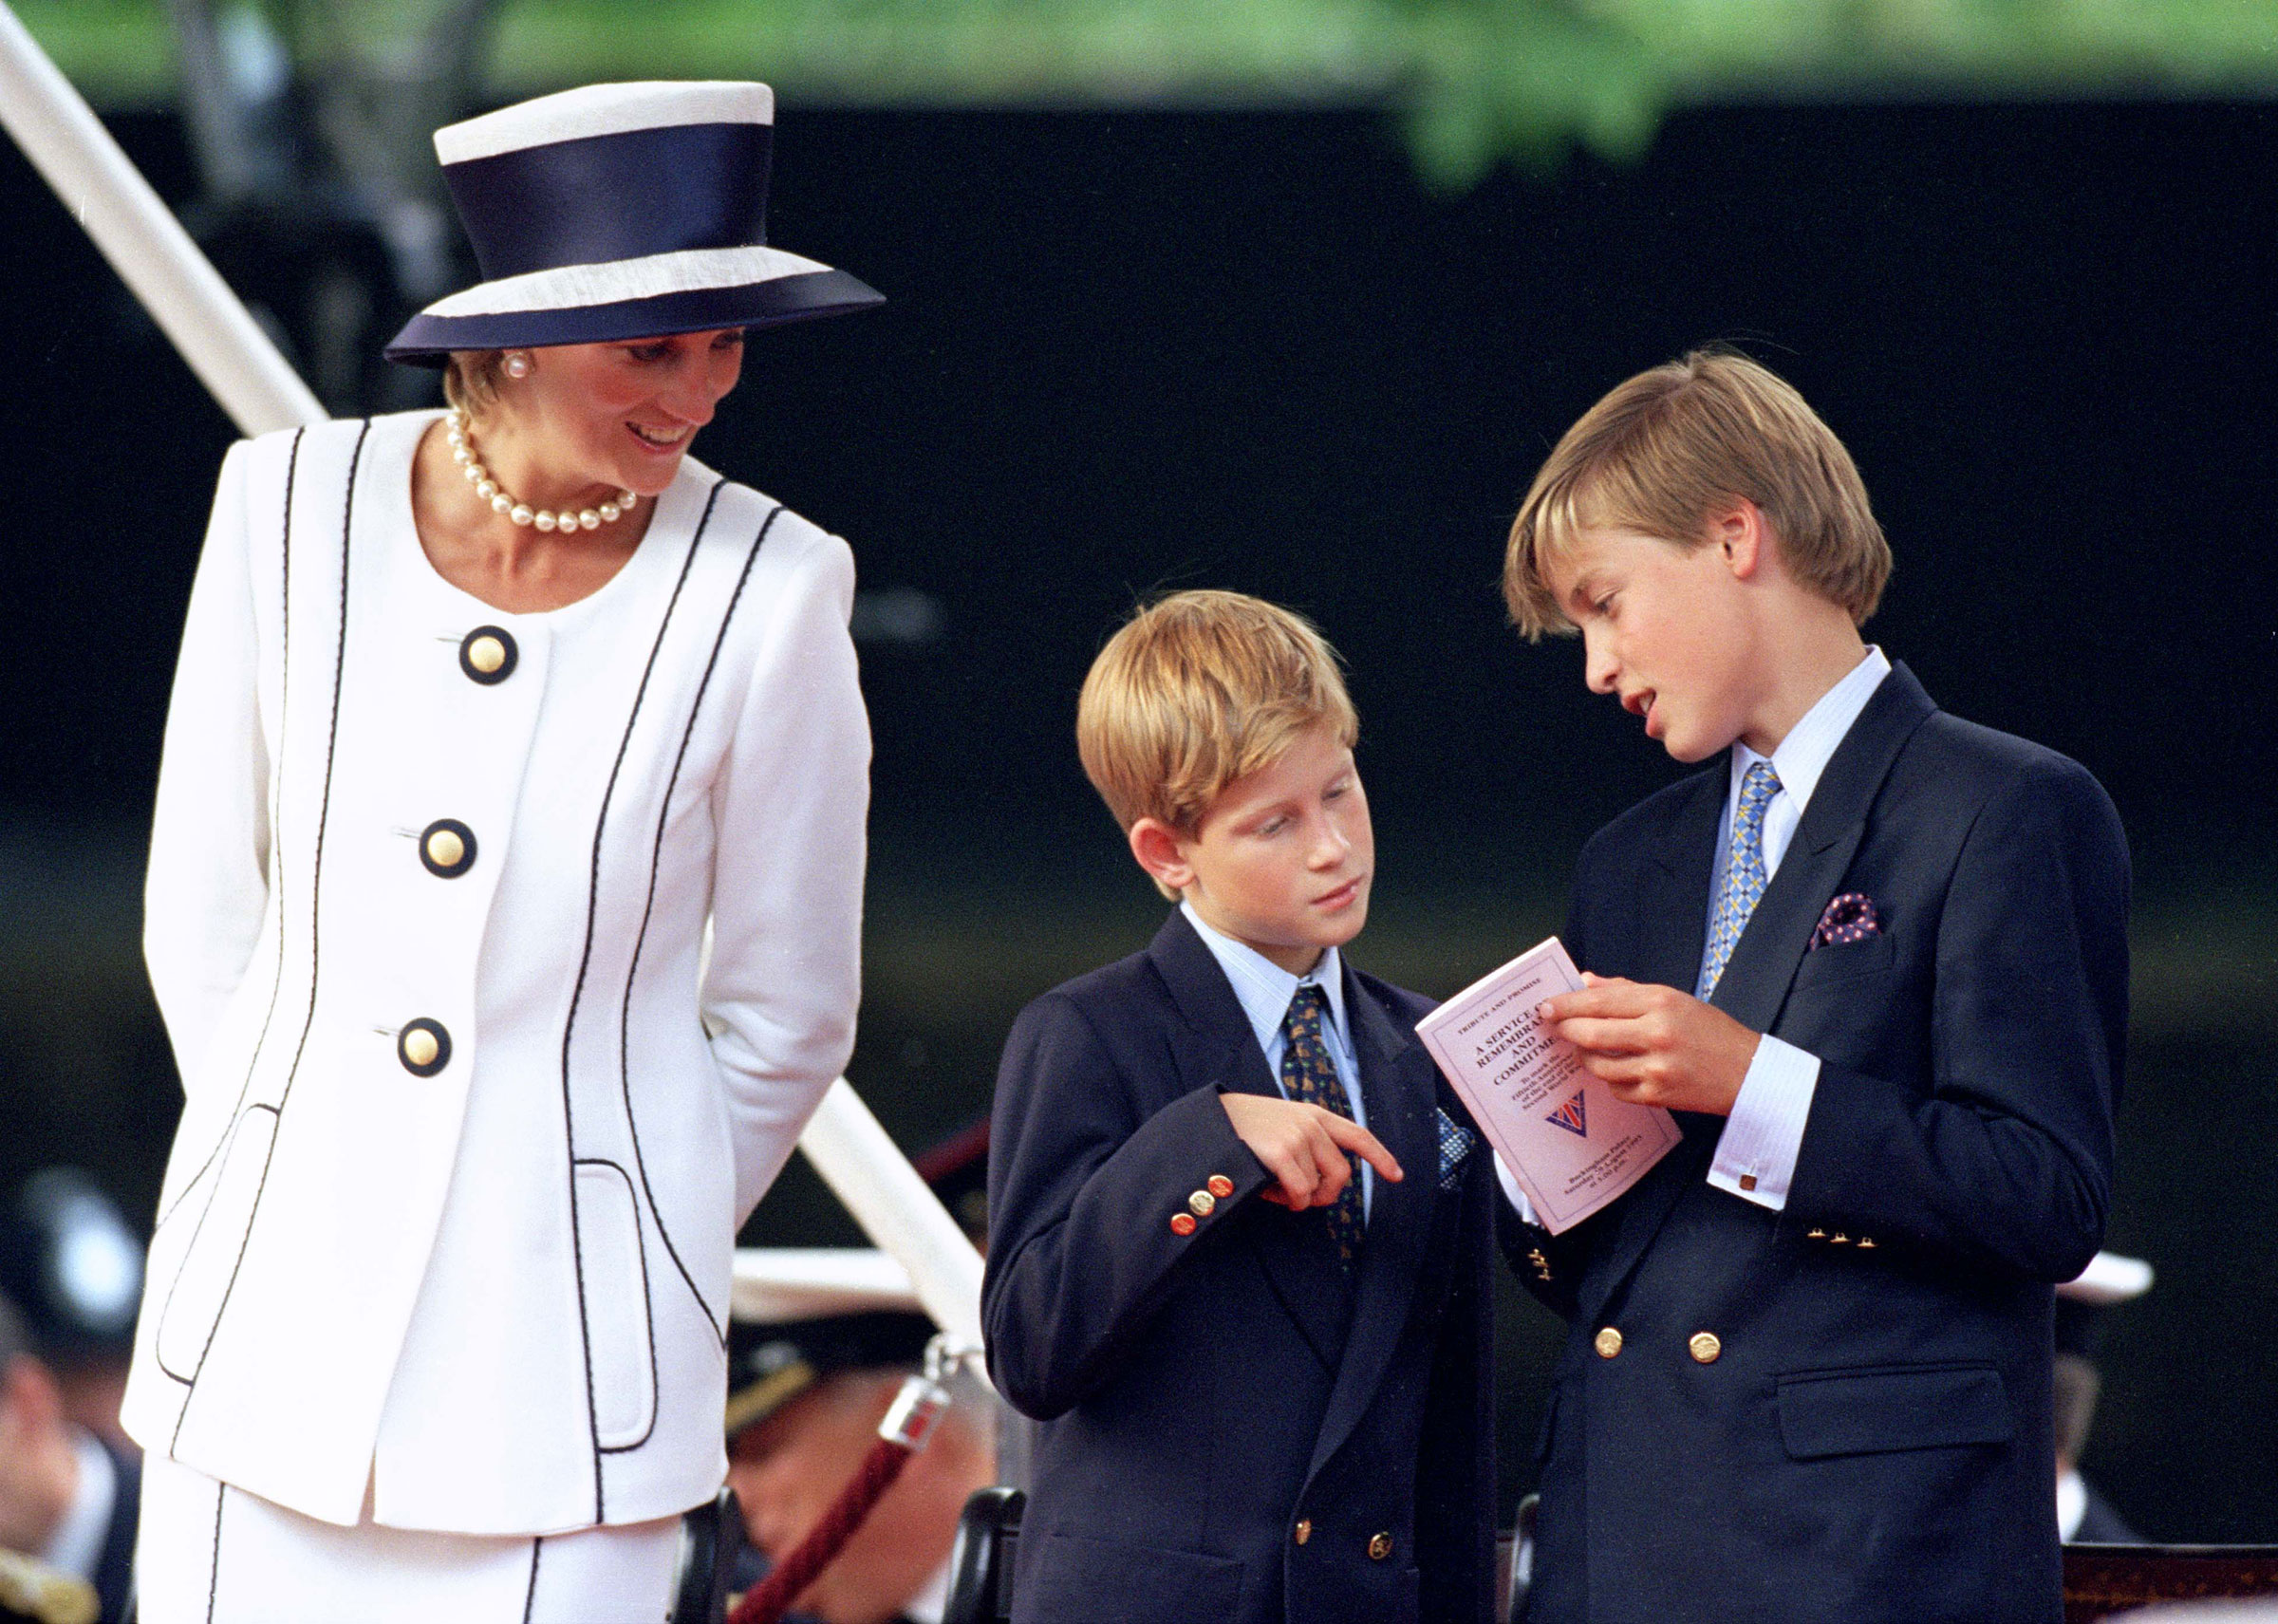 Diana with Harry and William, London, 1995. (Antony Jones—Julian Parker/UK Press/Getty Images)